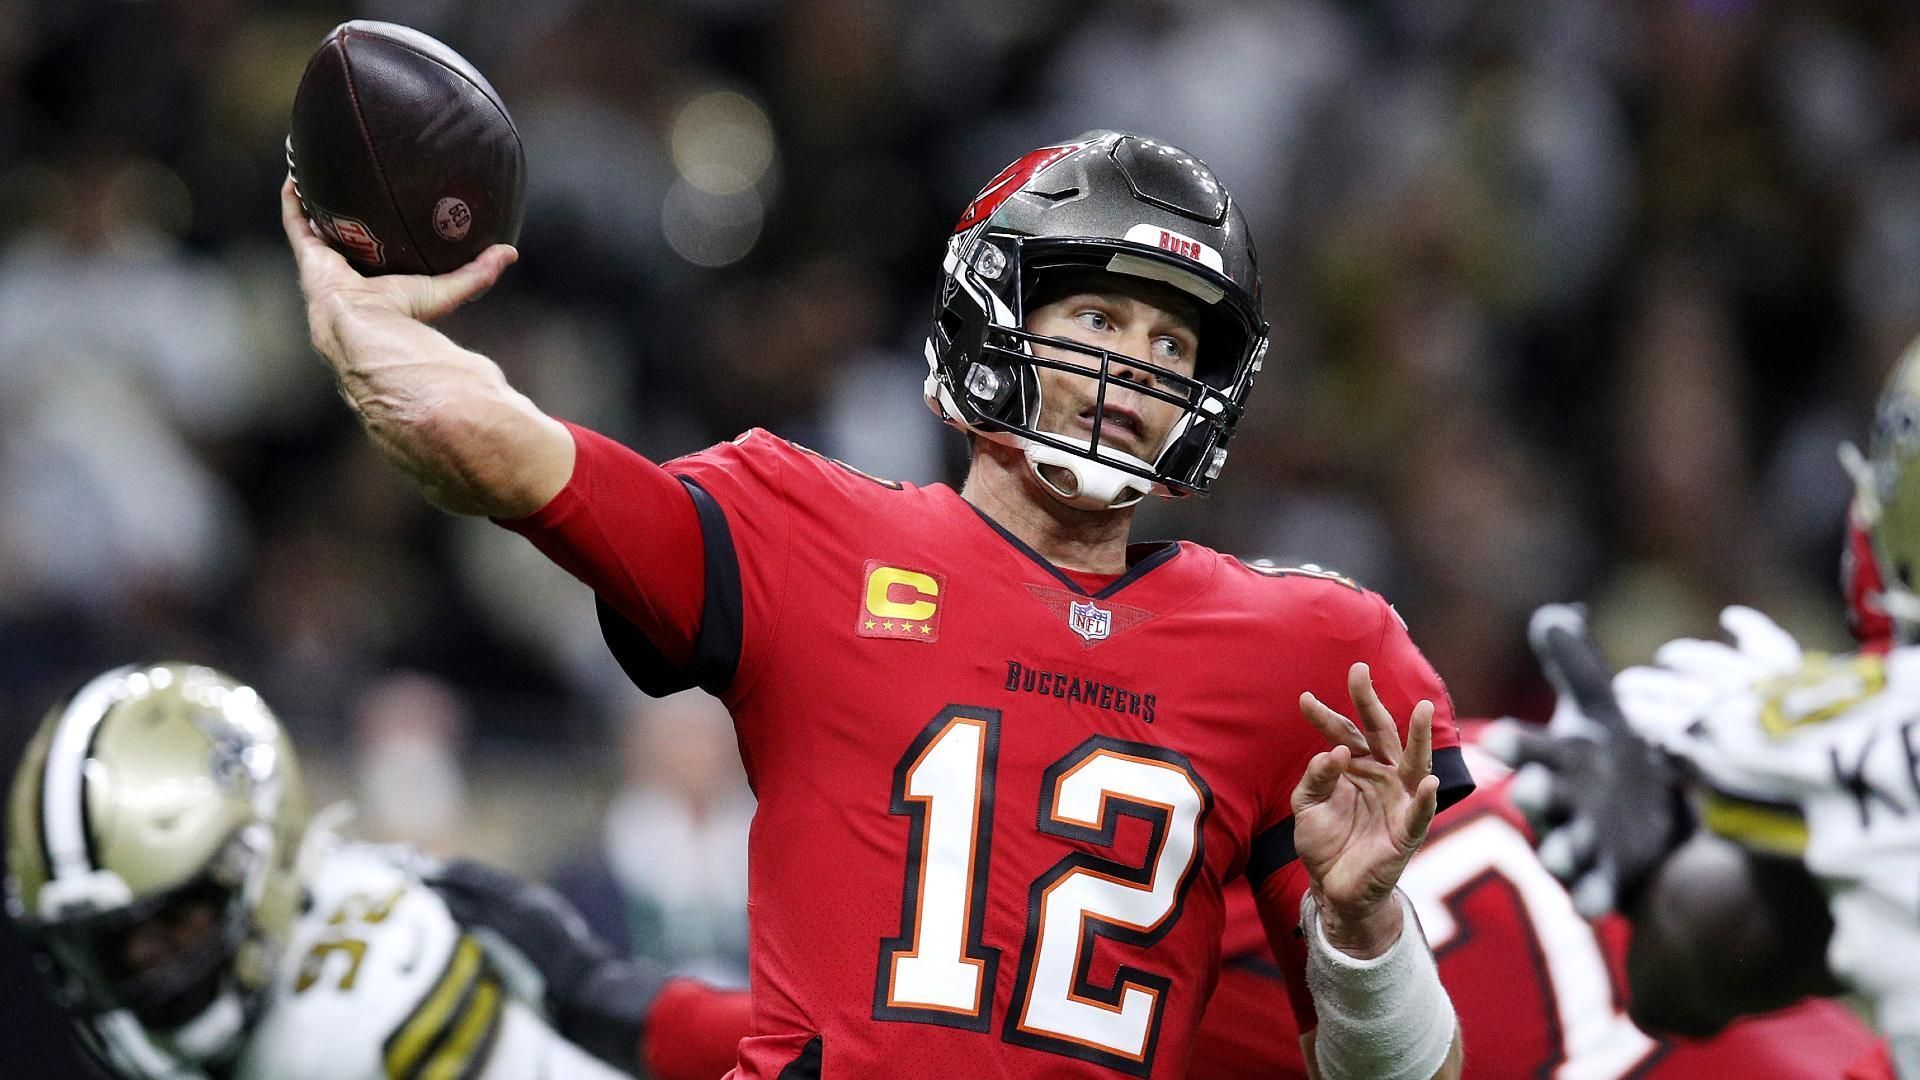 
                <strong>Quarterback: Tom Brady (Tampa Bay Buccaneers) </strong><br>
                &#x2022; <strong>Punkte im Schnitt: 30,9</strong> -<br>&#x2022; Passing Yards: 2650 - <br>&#x2022; Passing Touchdowns: 25 - <br>&#x2022; Rushing Yards: 39 - <br>&#x2022; Rushing Touchdowns: 1 - <br>
              